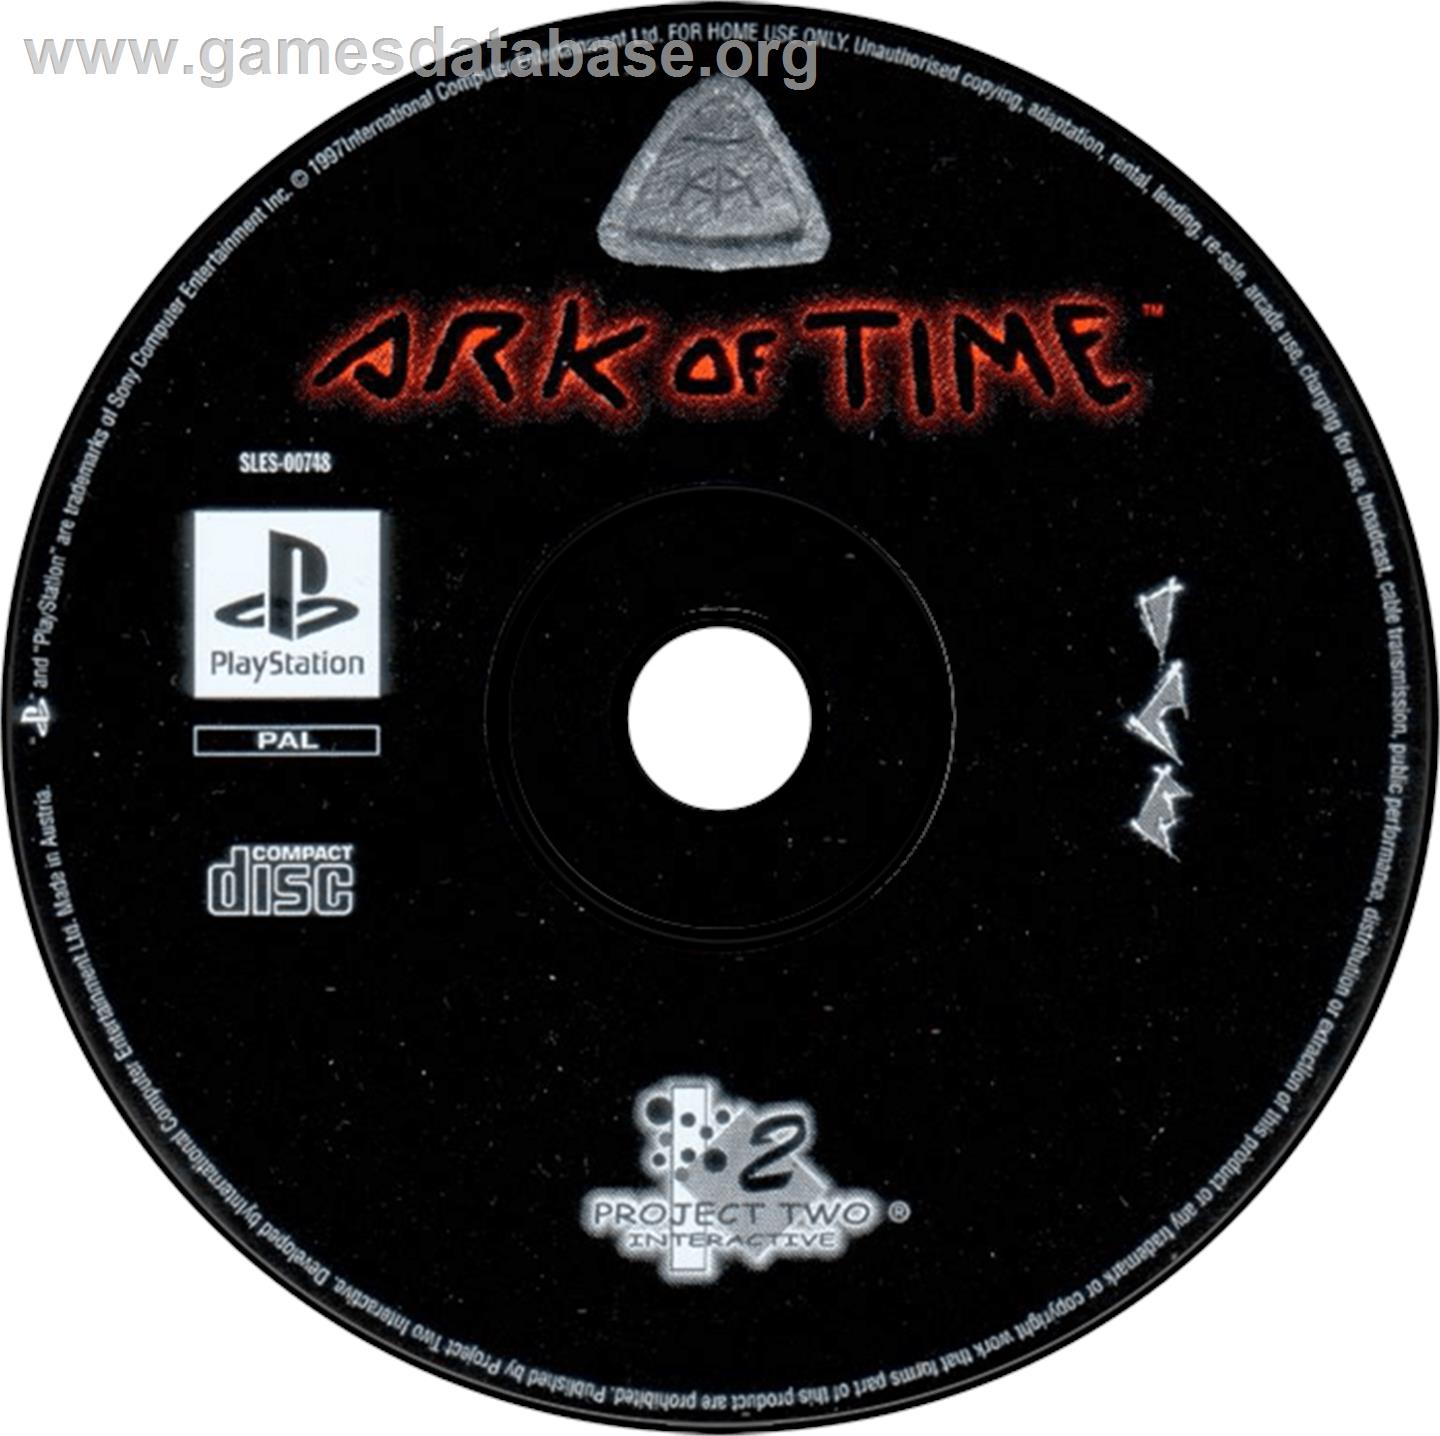 Ark of Time - Sony Playstation - Artwork - Disc